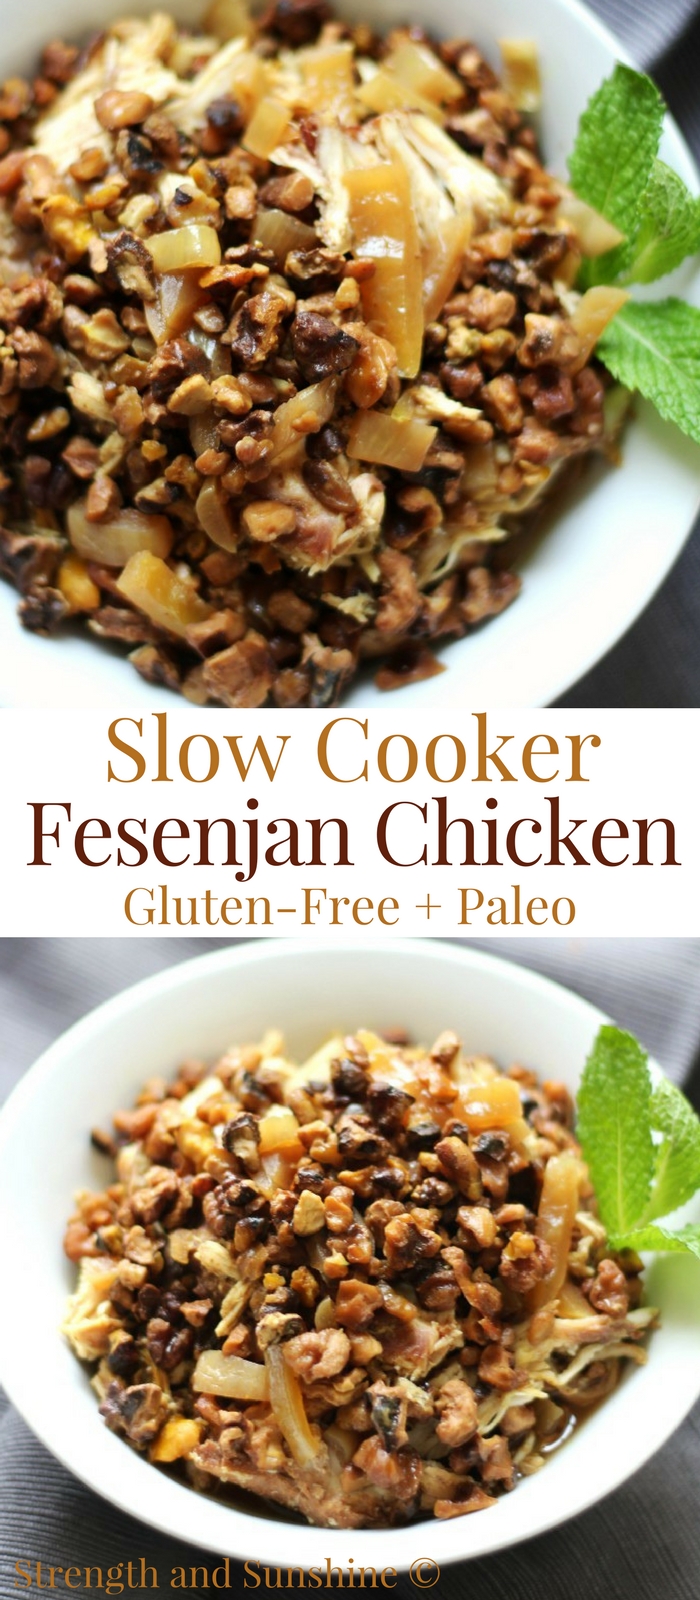 Slow Cooker Fesenjan Chicken (Gluten-Free, Paleo) | Strength and Sunshine @RebeccaGF666 The traditional Iranian stew with chicken and the deep flavors of pomegranate molasses and walnuts, now made easy right in the crock-pot! Slow Cooker Fesenjan Chicken is a hearty gluten-free & paleo dinner recipe that will warm the belly and soul! #fesenjan #slowcooker #crockpot #chicken